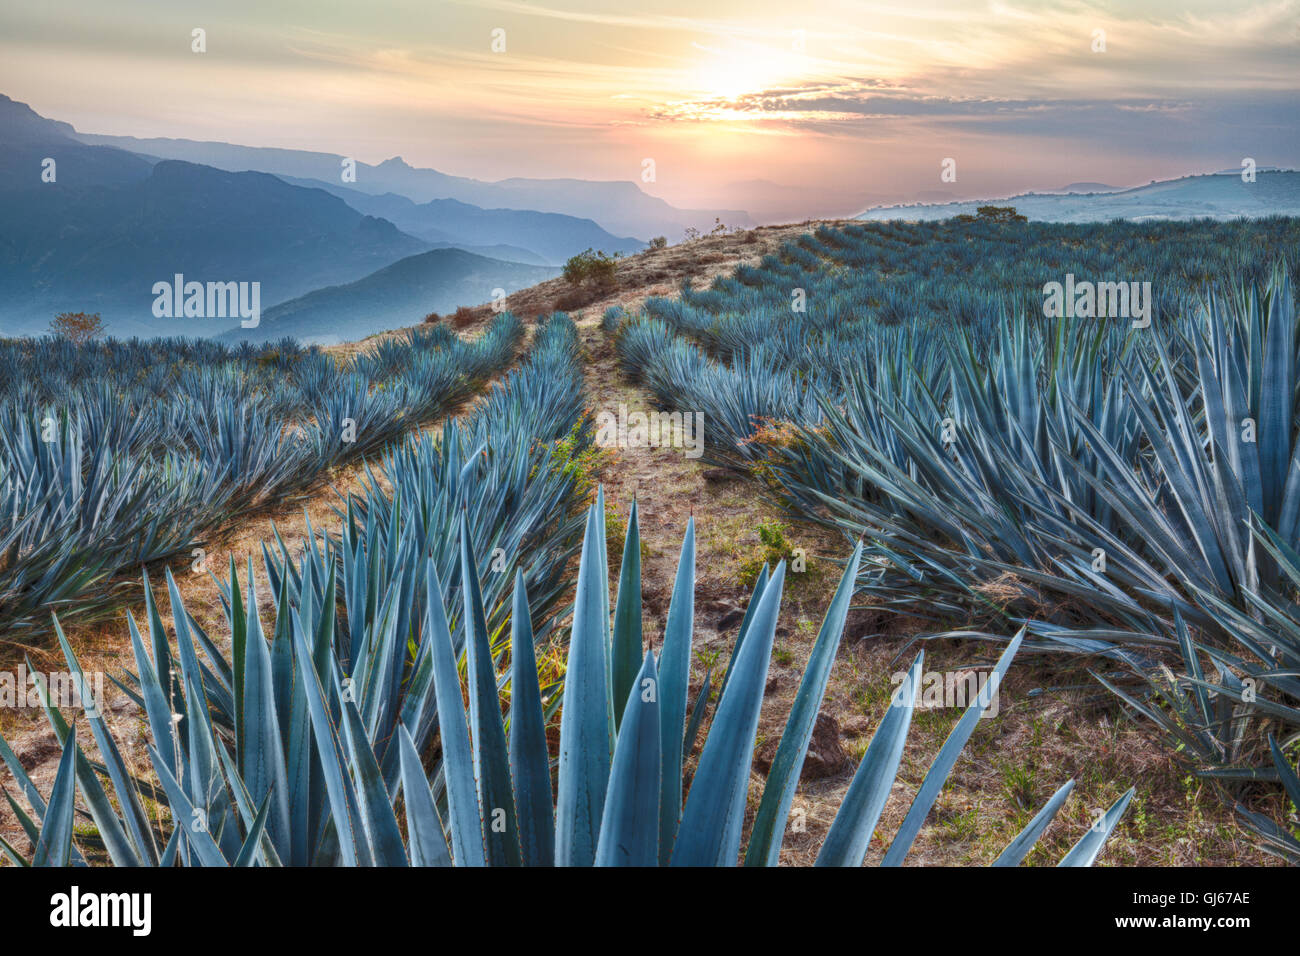 Field of blue agave cactus near Tequila, Jalisco, Mexico. Stock Photo